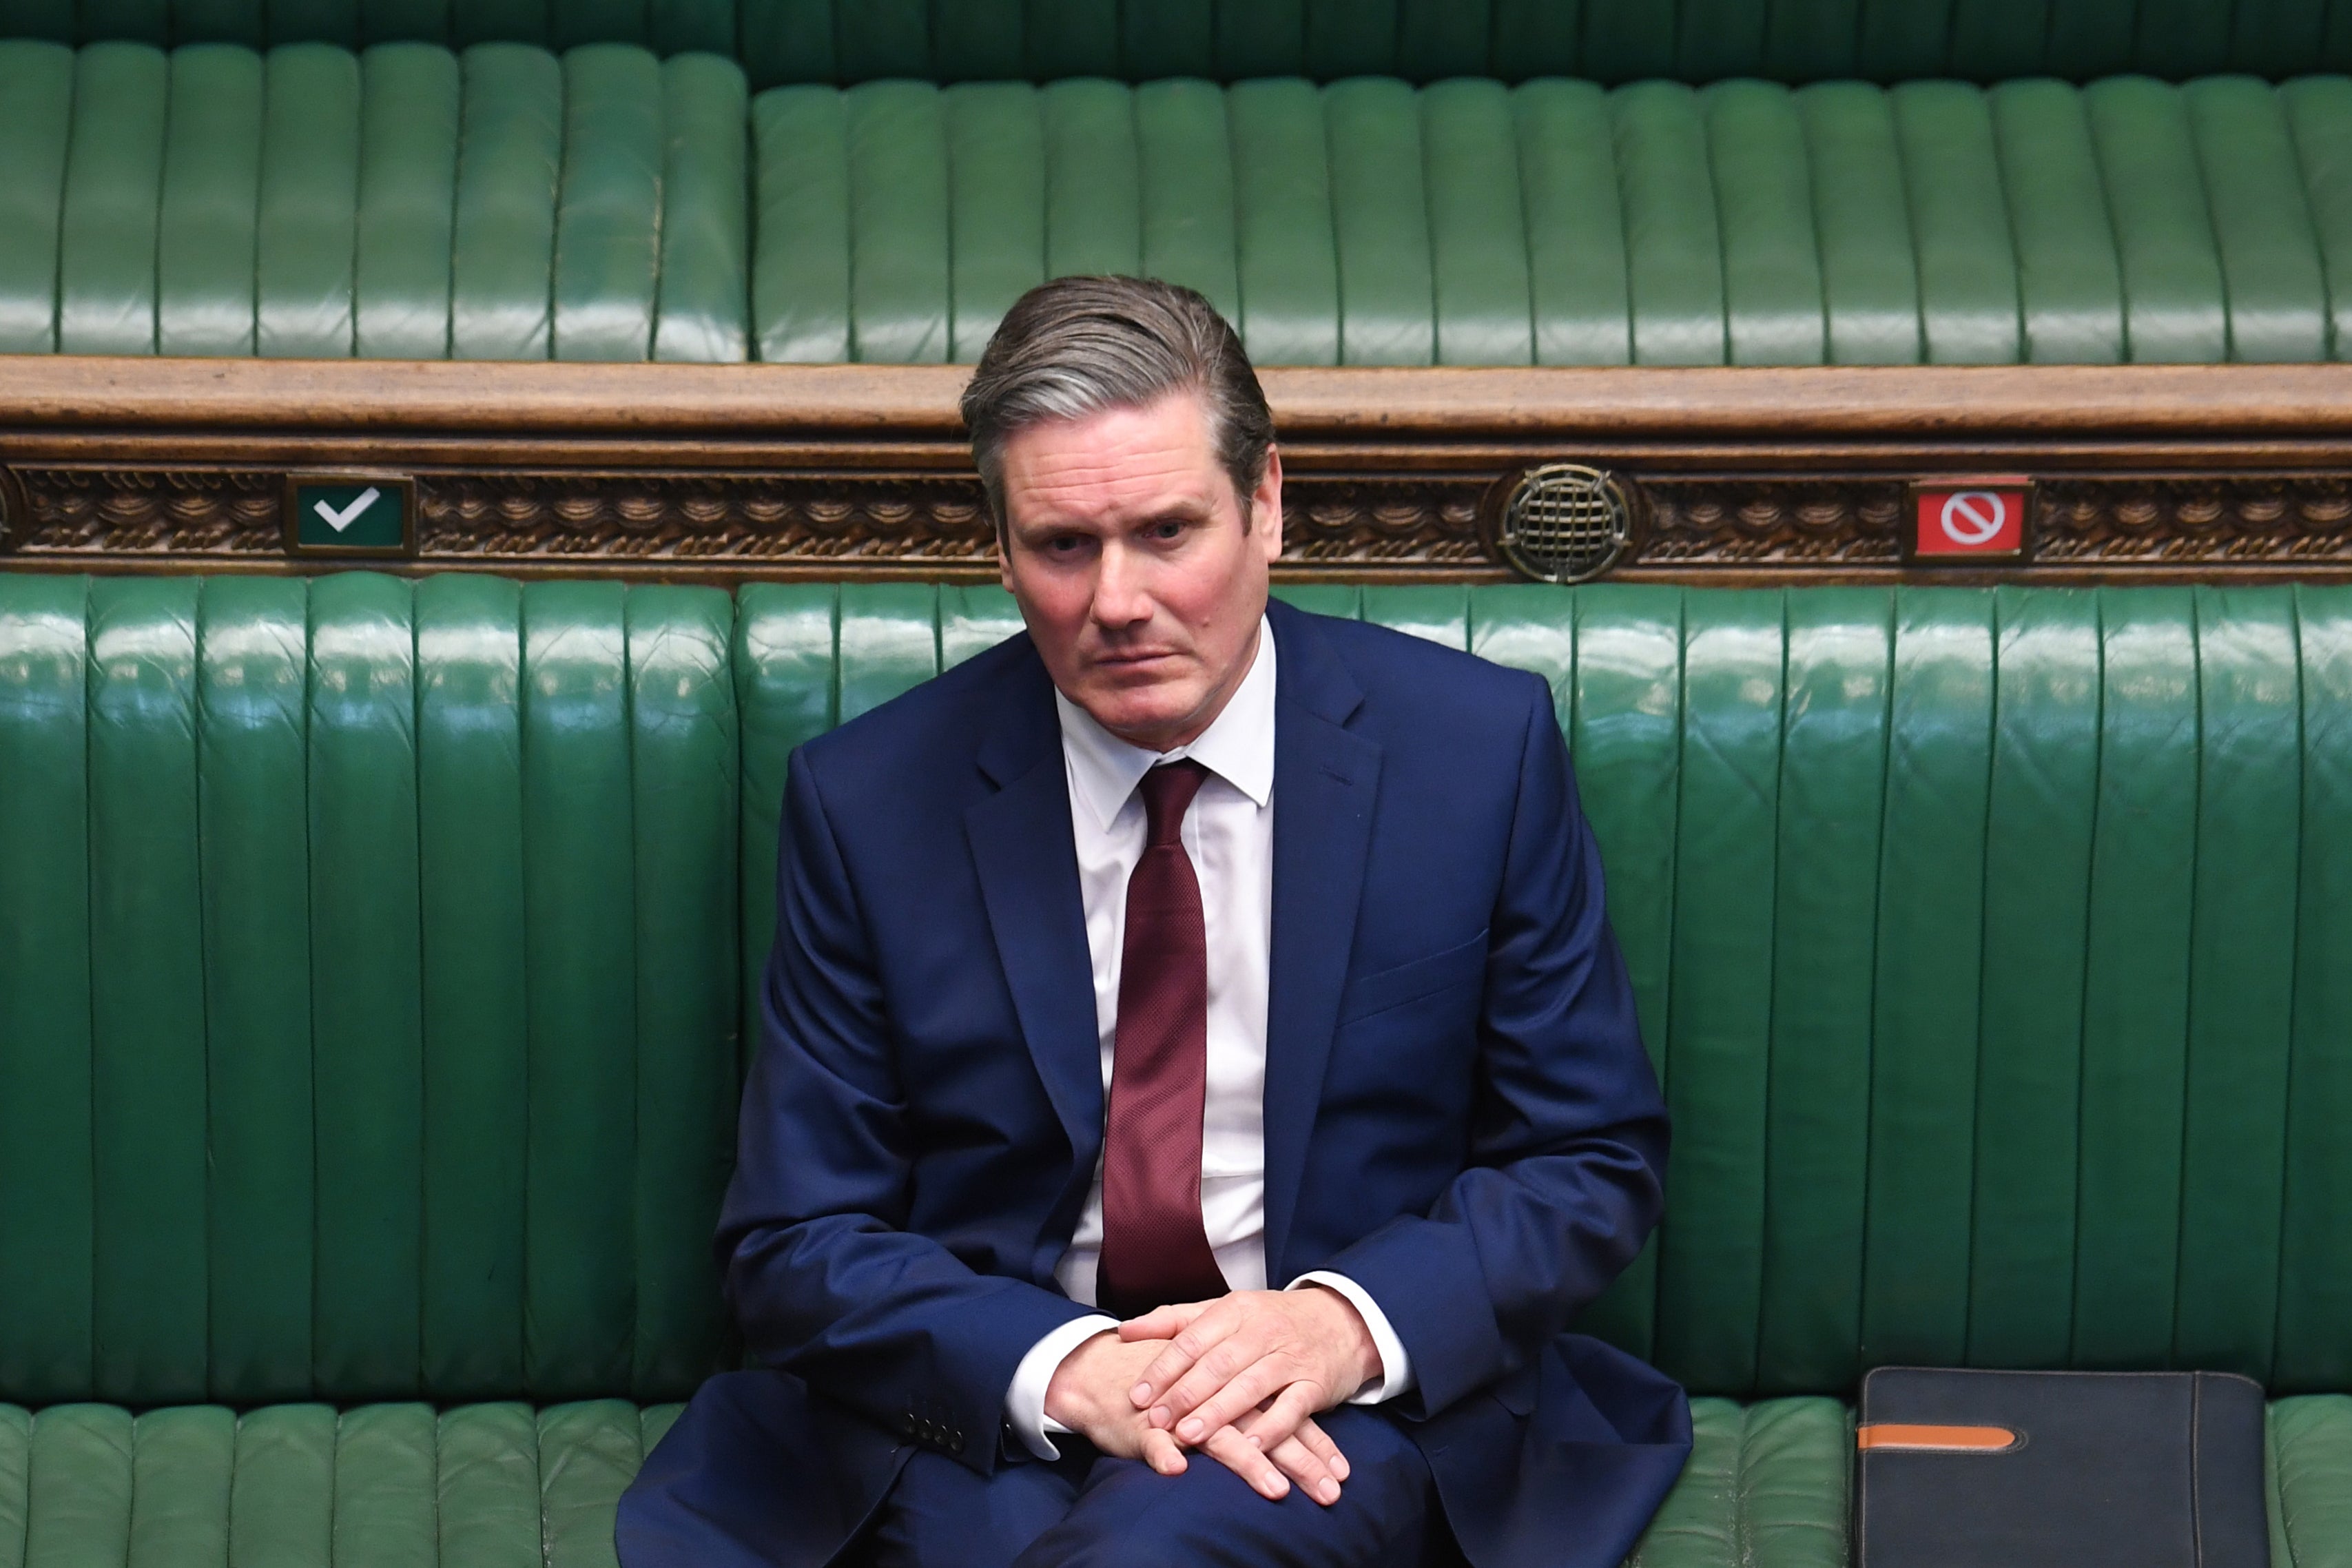 Sir Keir Starmer may be the next PM but there are many variables to consider